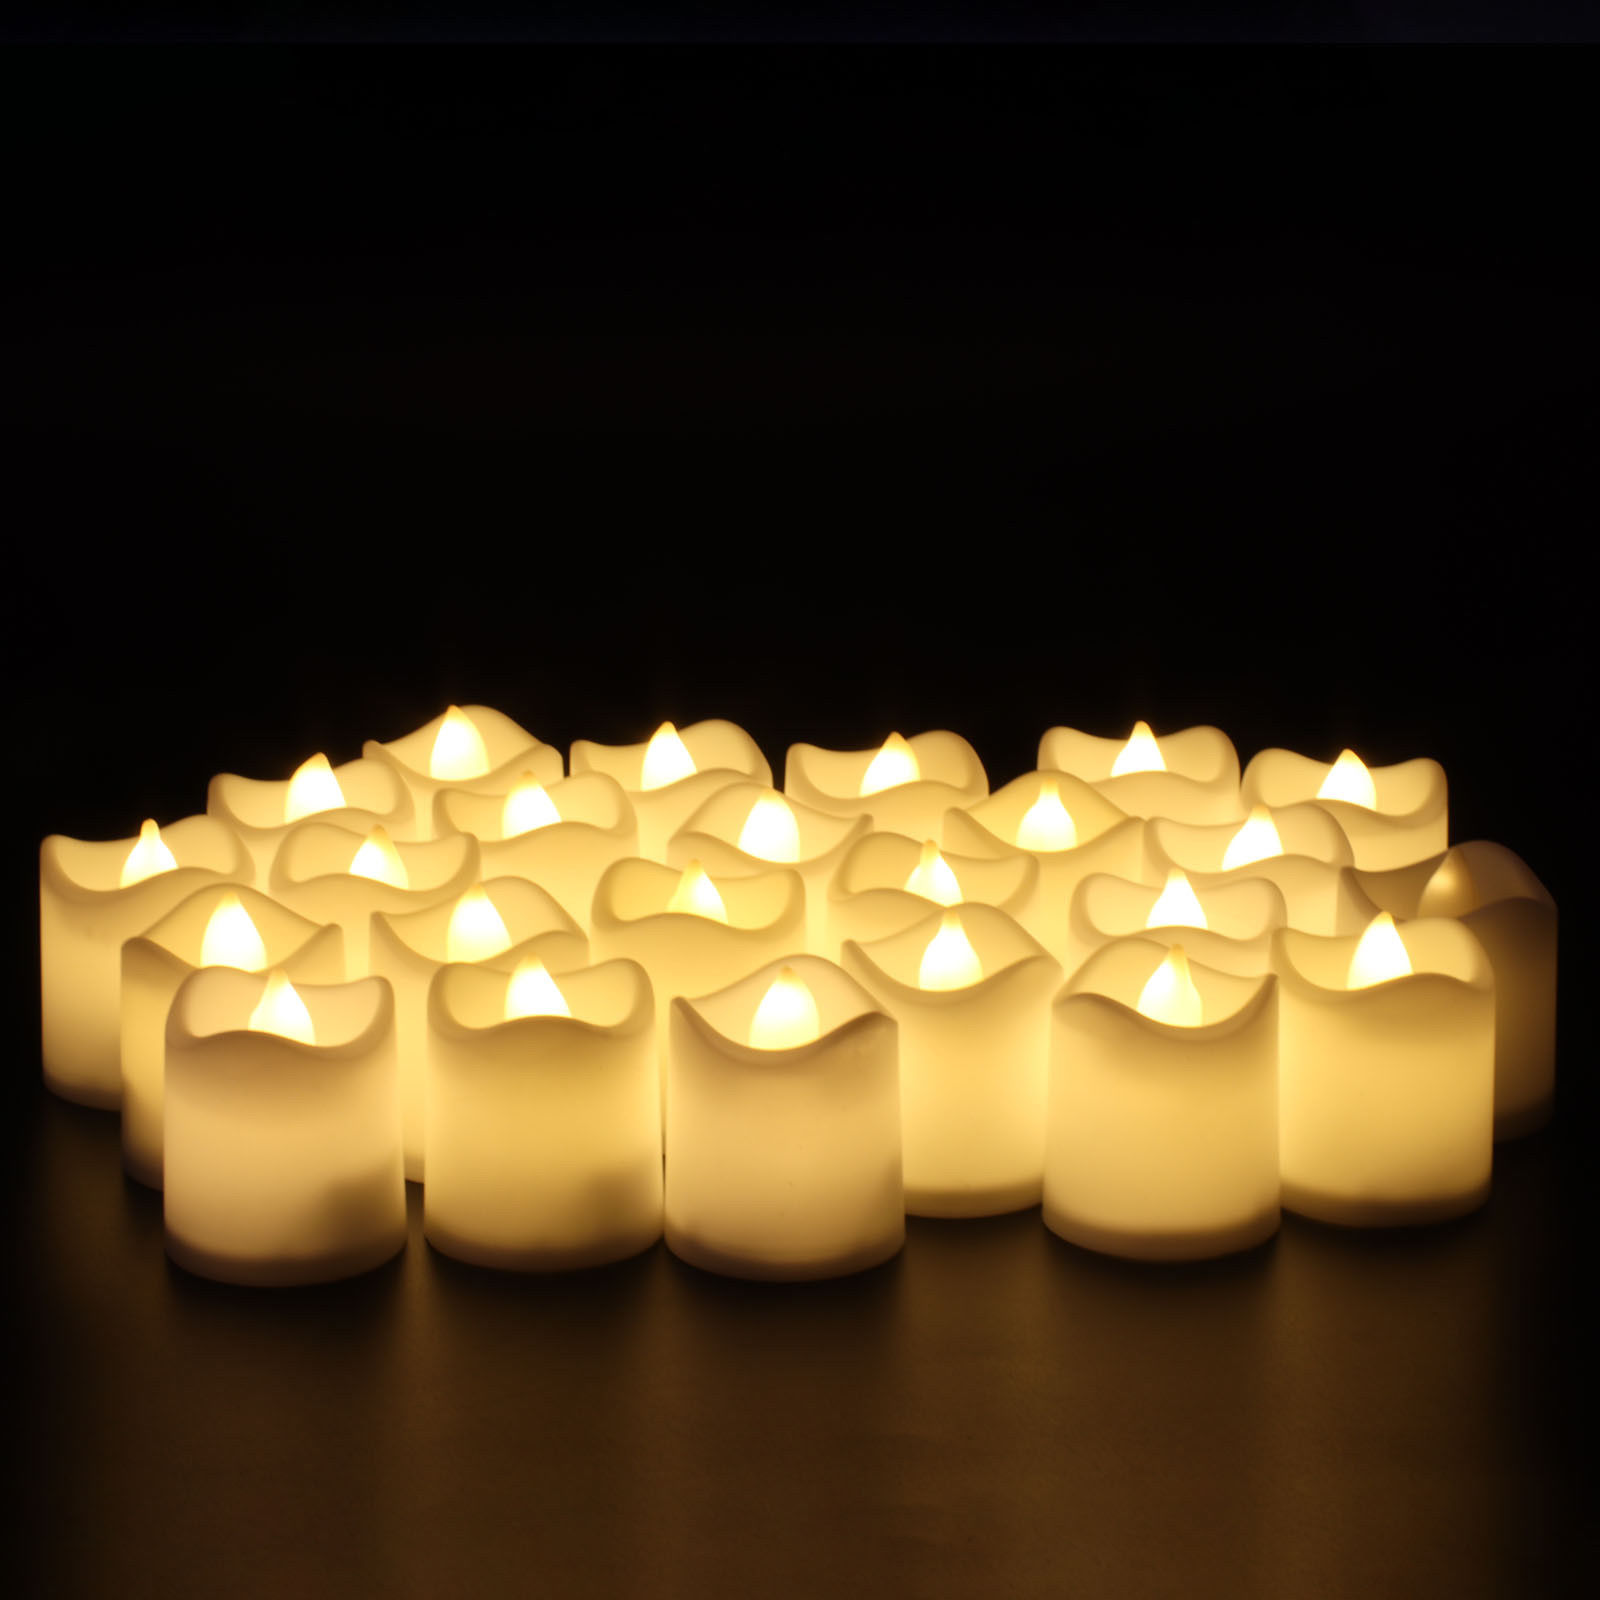 24 Flameless Votive Decor Candles LED Tea Light Battery Operated Flickering Lamp 